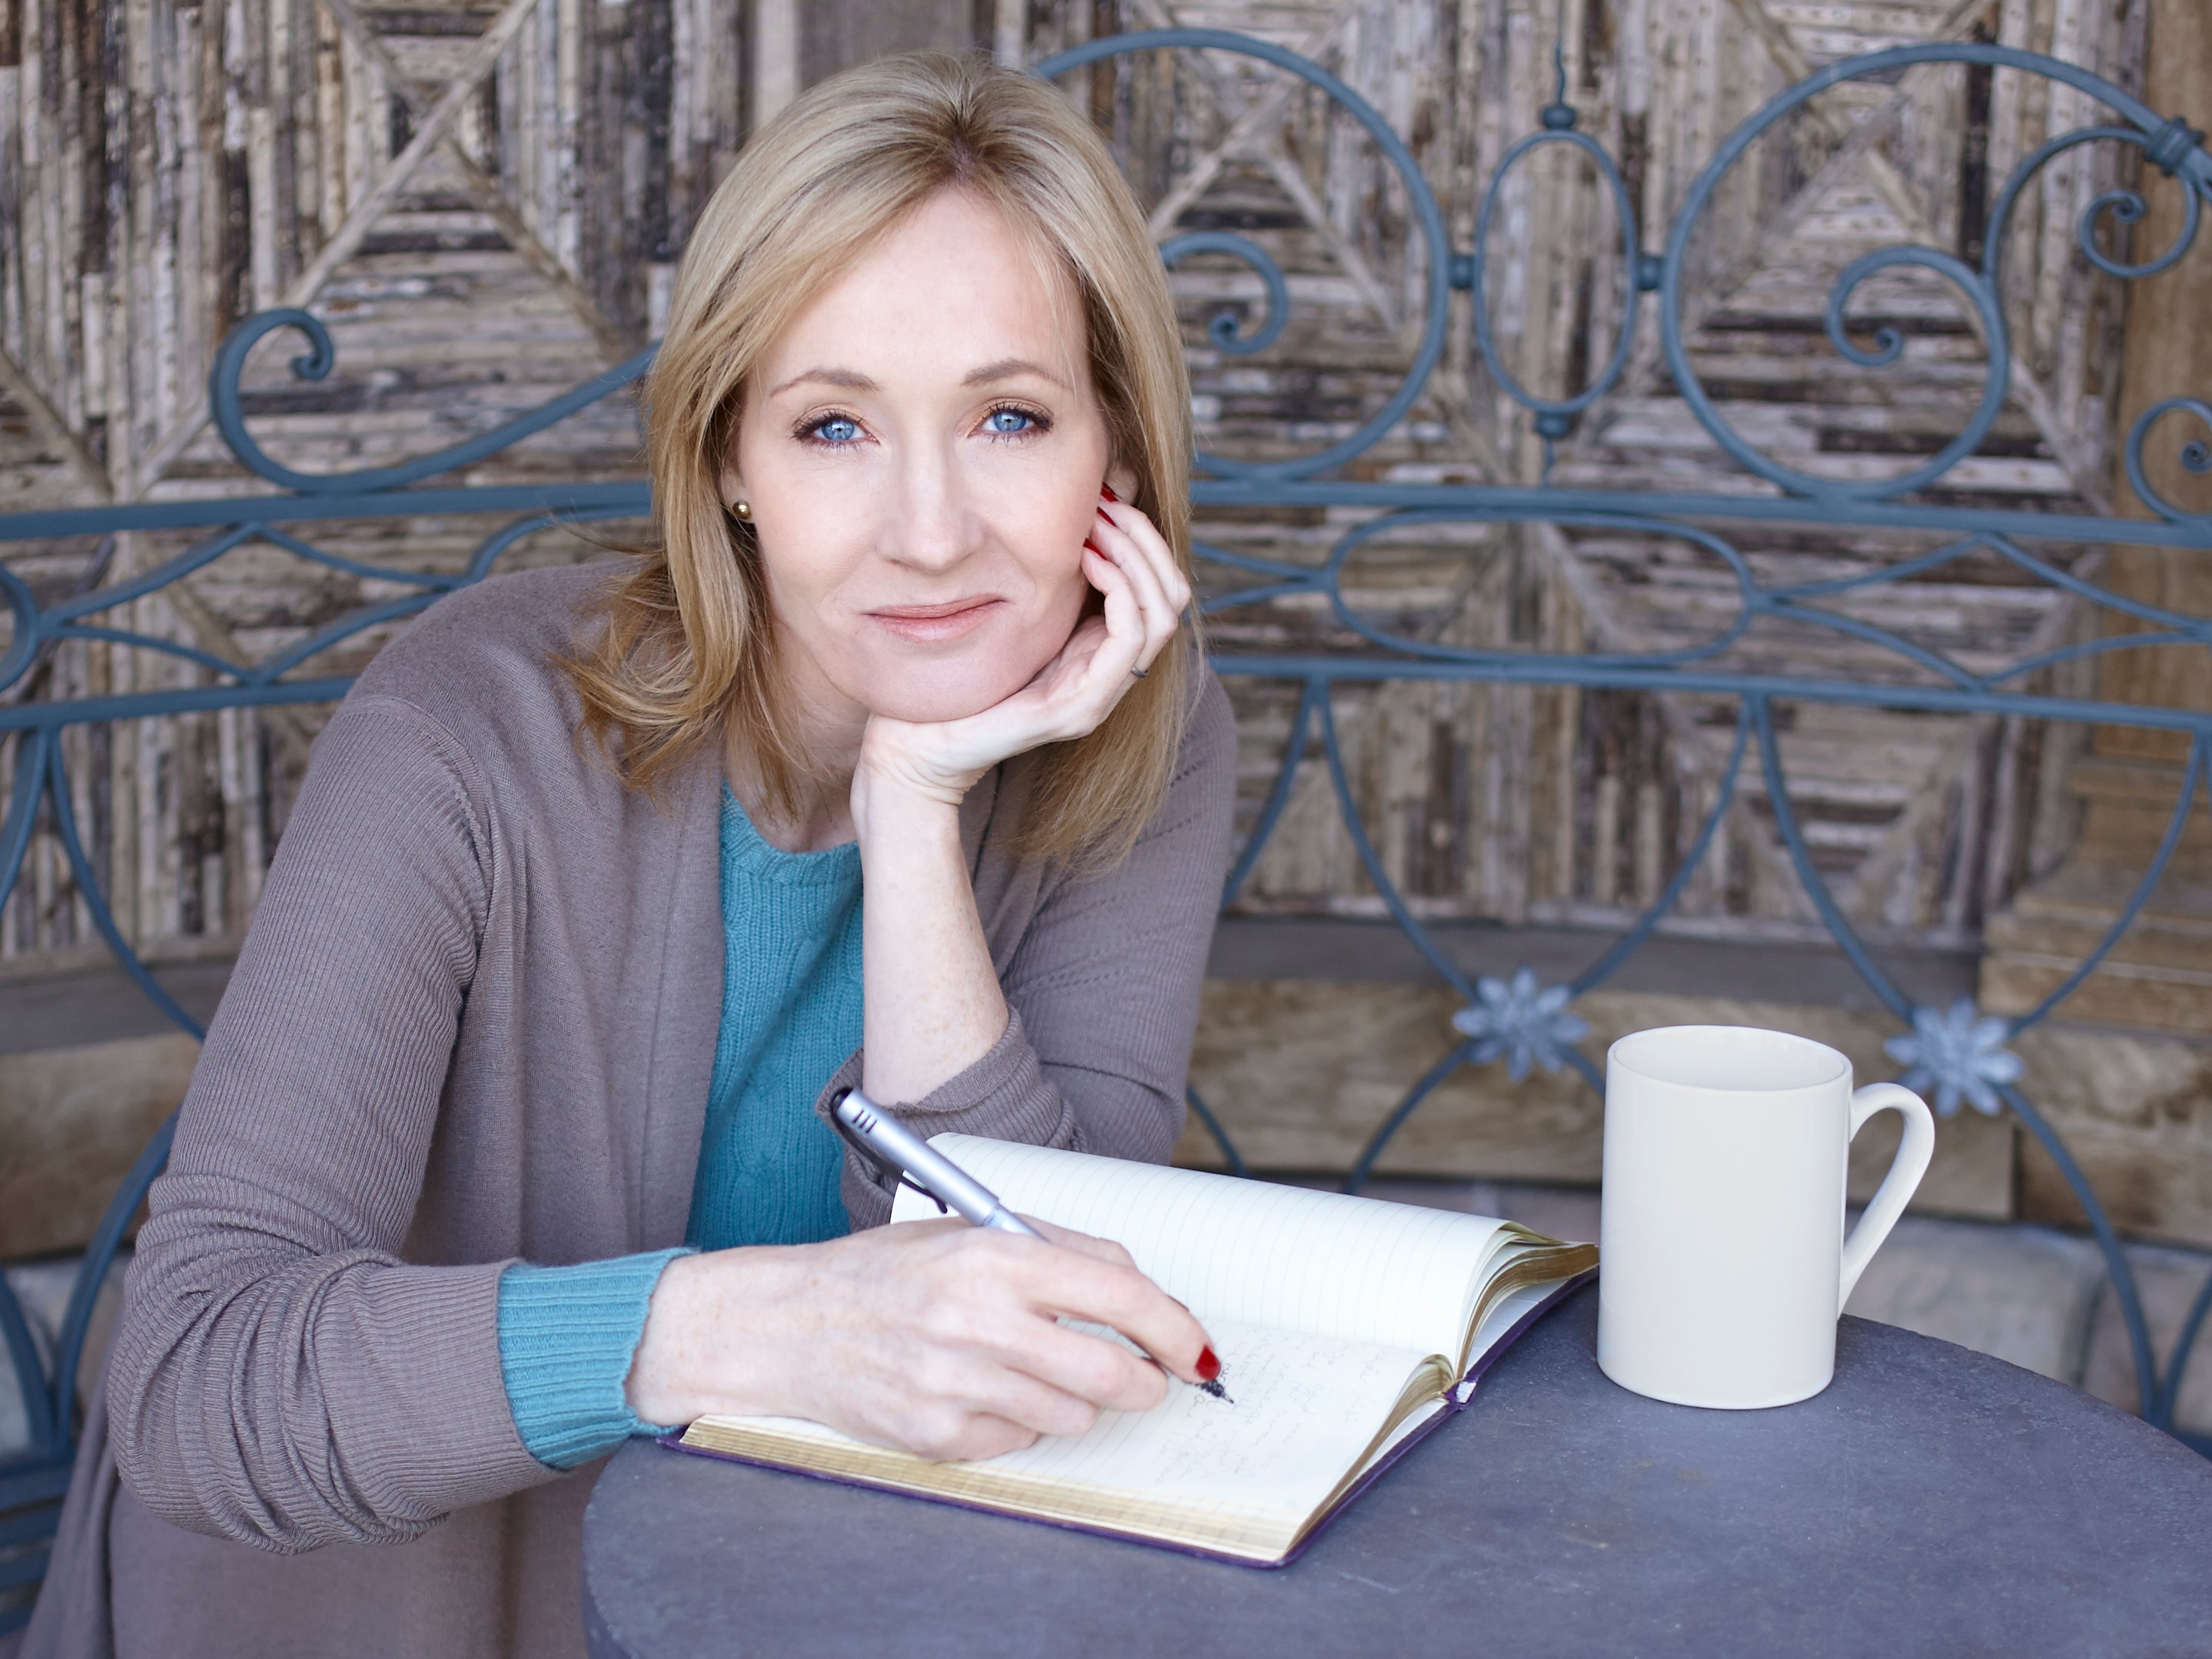 Warner Bros. scolds J.K. Rowling for stating the obvious: That biological sex is real, and transgenderism is delusion